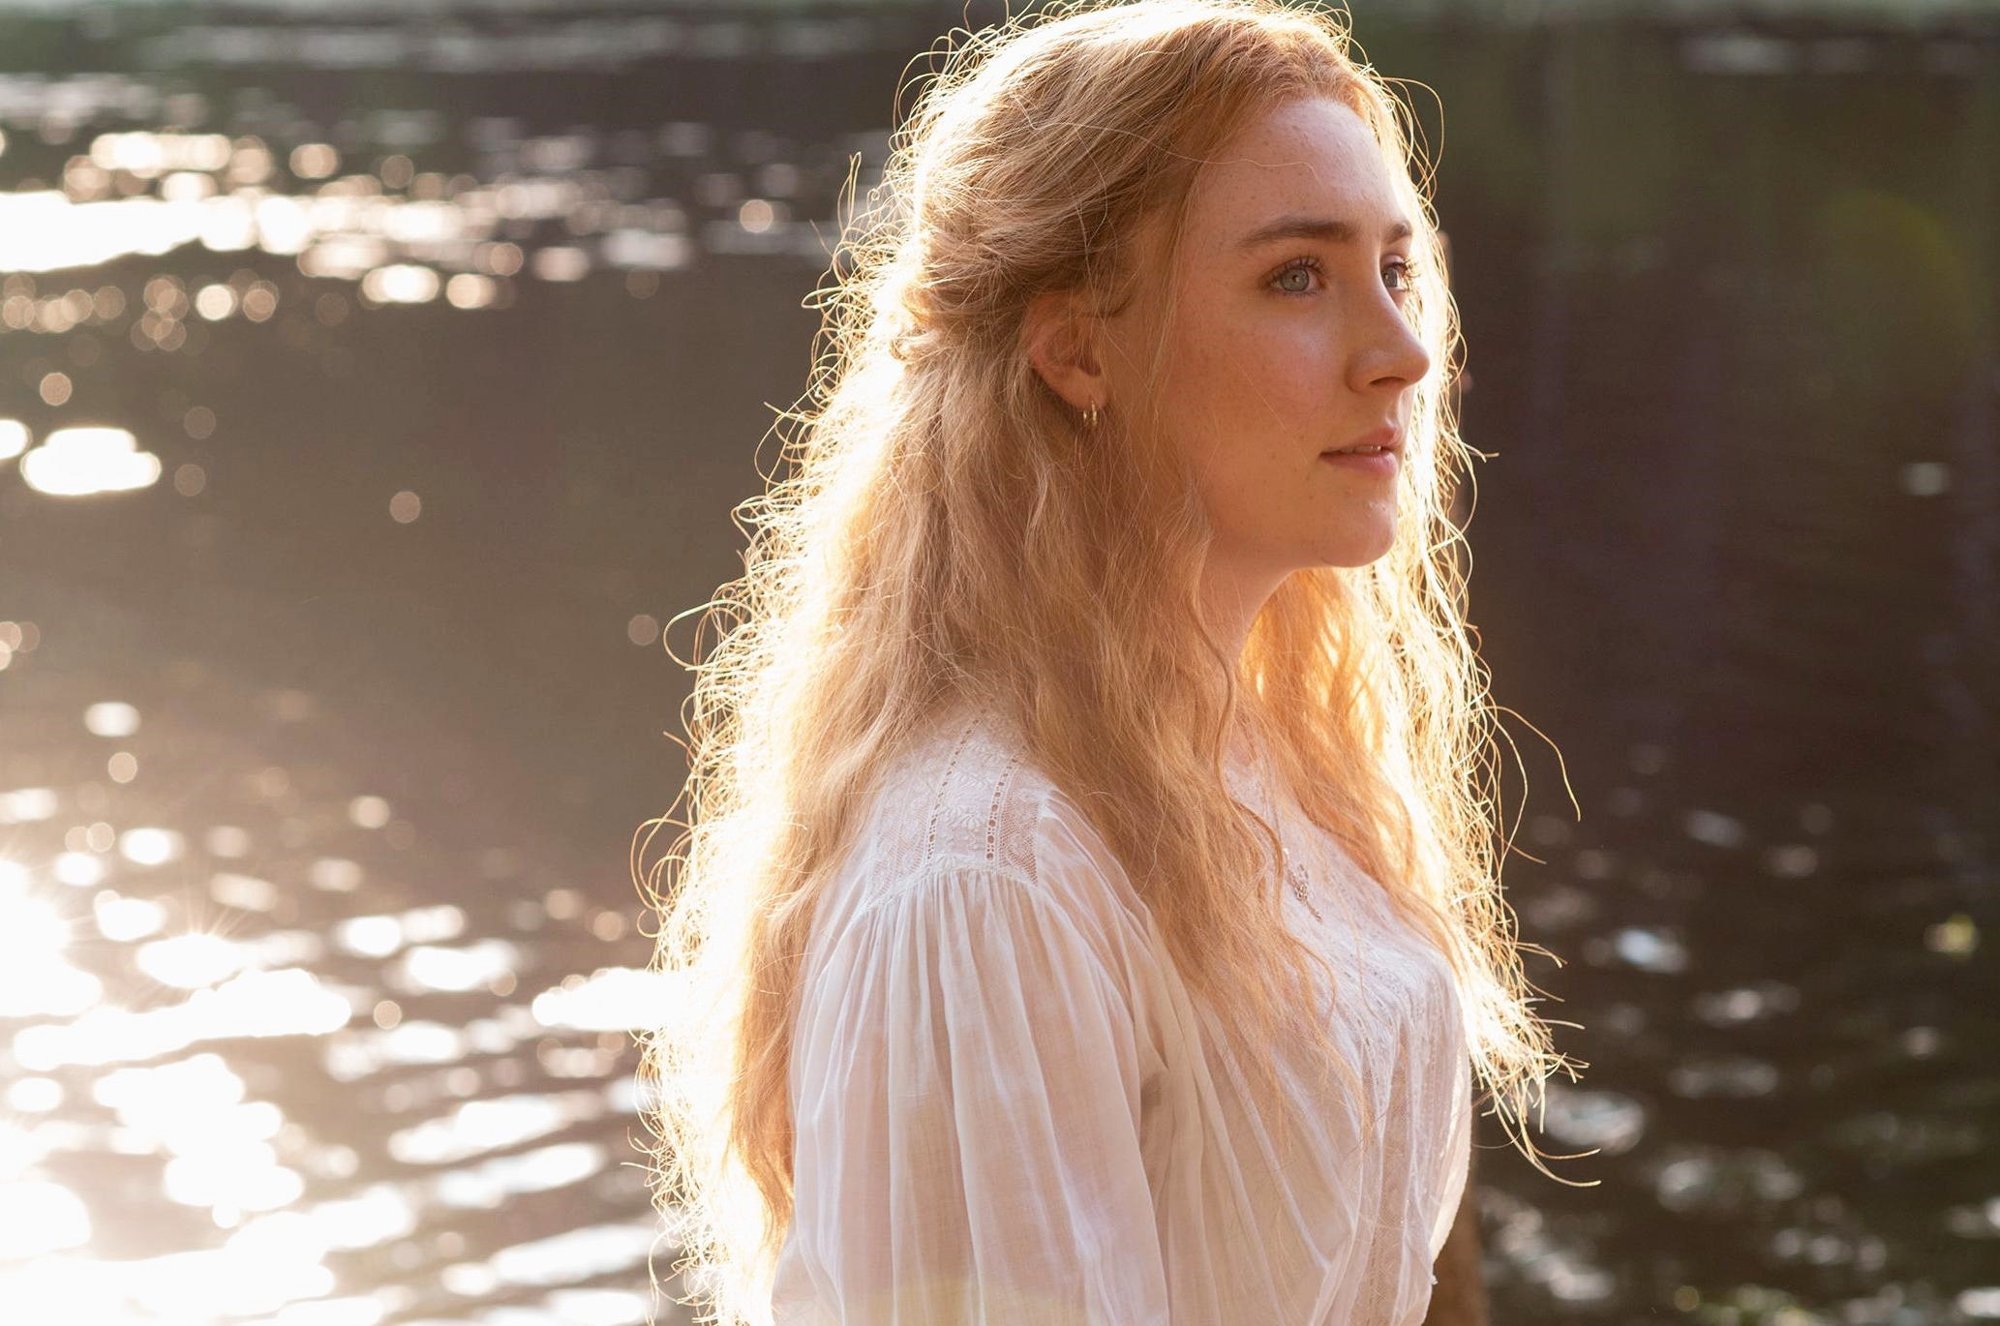 Saoirse Ronan stars as Nina in Sony Pictures Classics' The Seagull (2018)